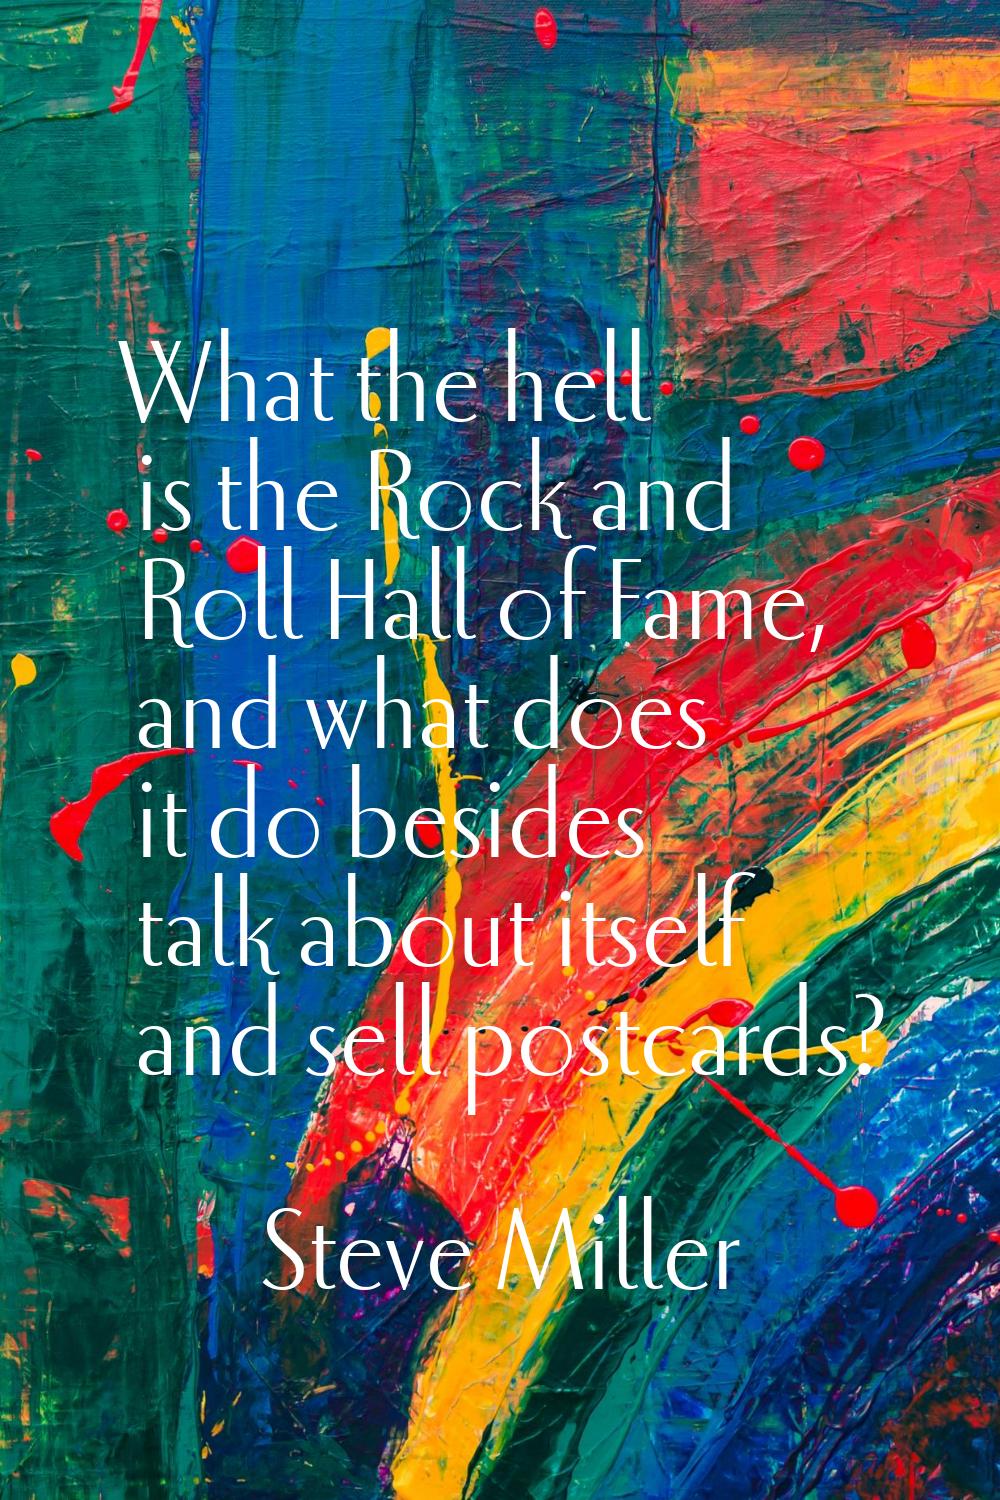 What the hell is the Rock and Roll Hall of Fame, and what does it do besides talk about itself and 